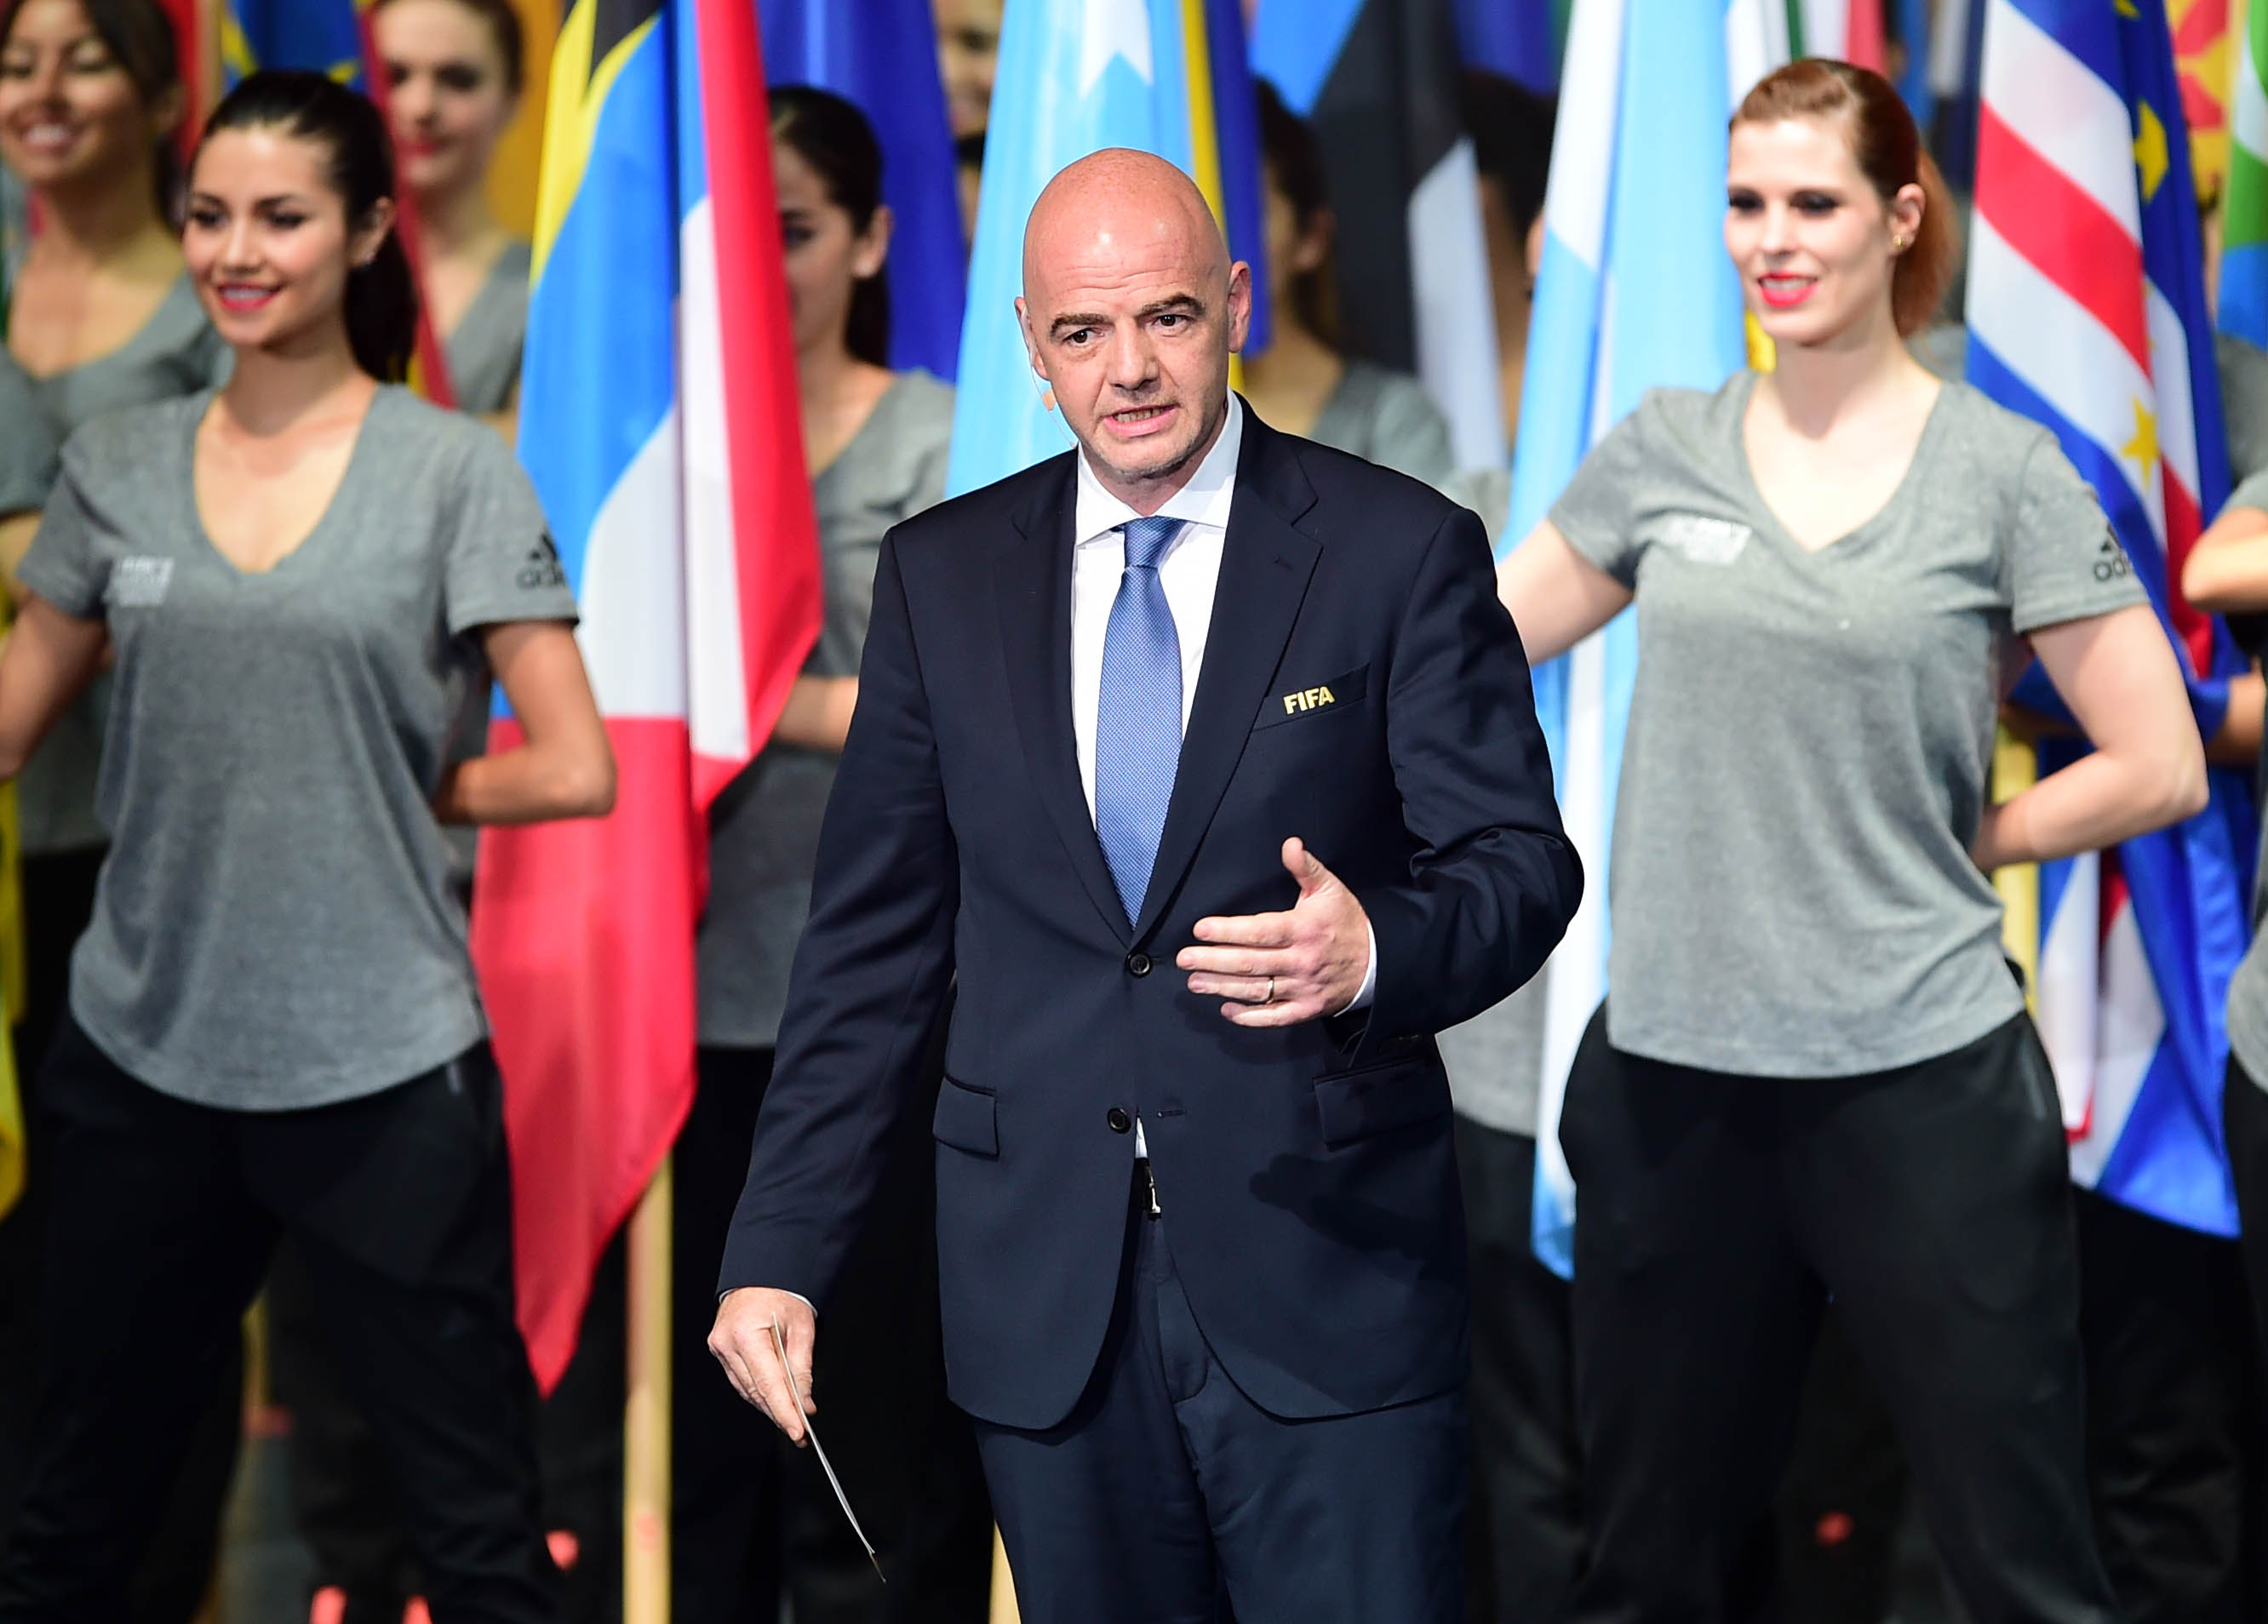 FIFA president, Italian Gianni Infantino, speaks during the opening ceremony of the 66th FIFA Congress be held from May 12 to 13 at the Auditorio Nacional in Mexico City on May 12, 2016.  / AFP PHOTO / ALFREDO ESTRELLA